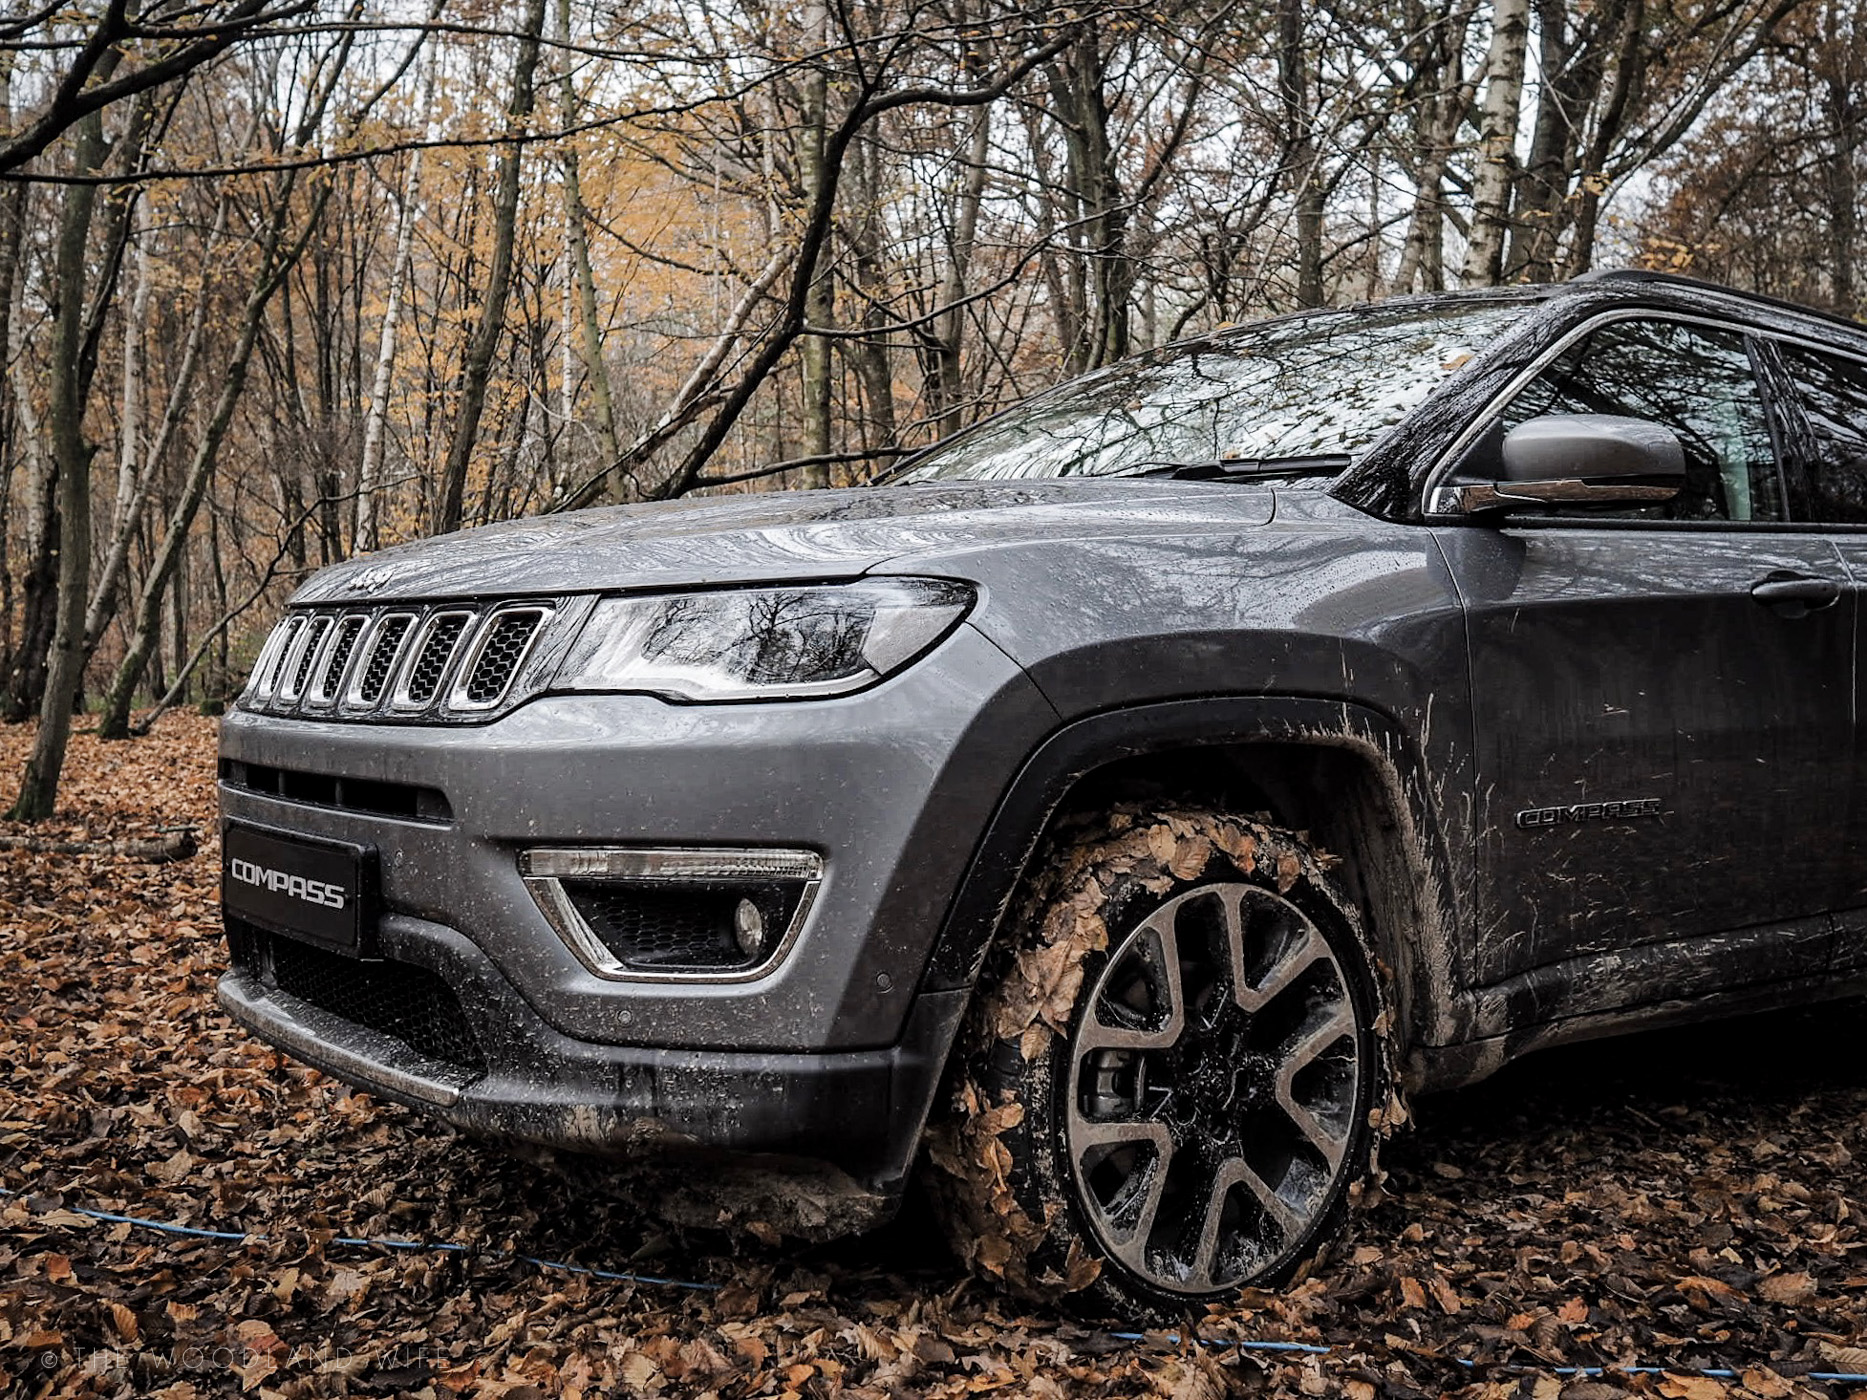 The Woodland Wife - Jeep - All new Jeep Compass 2018 - Recalculating - Lifestyle Launch at Hunter Gather Cook